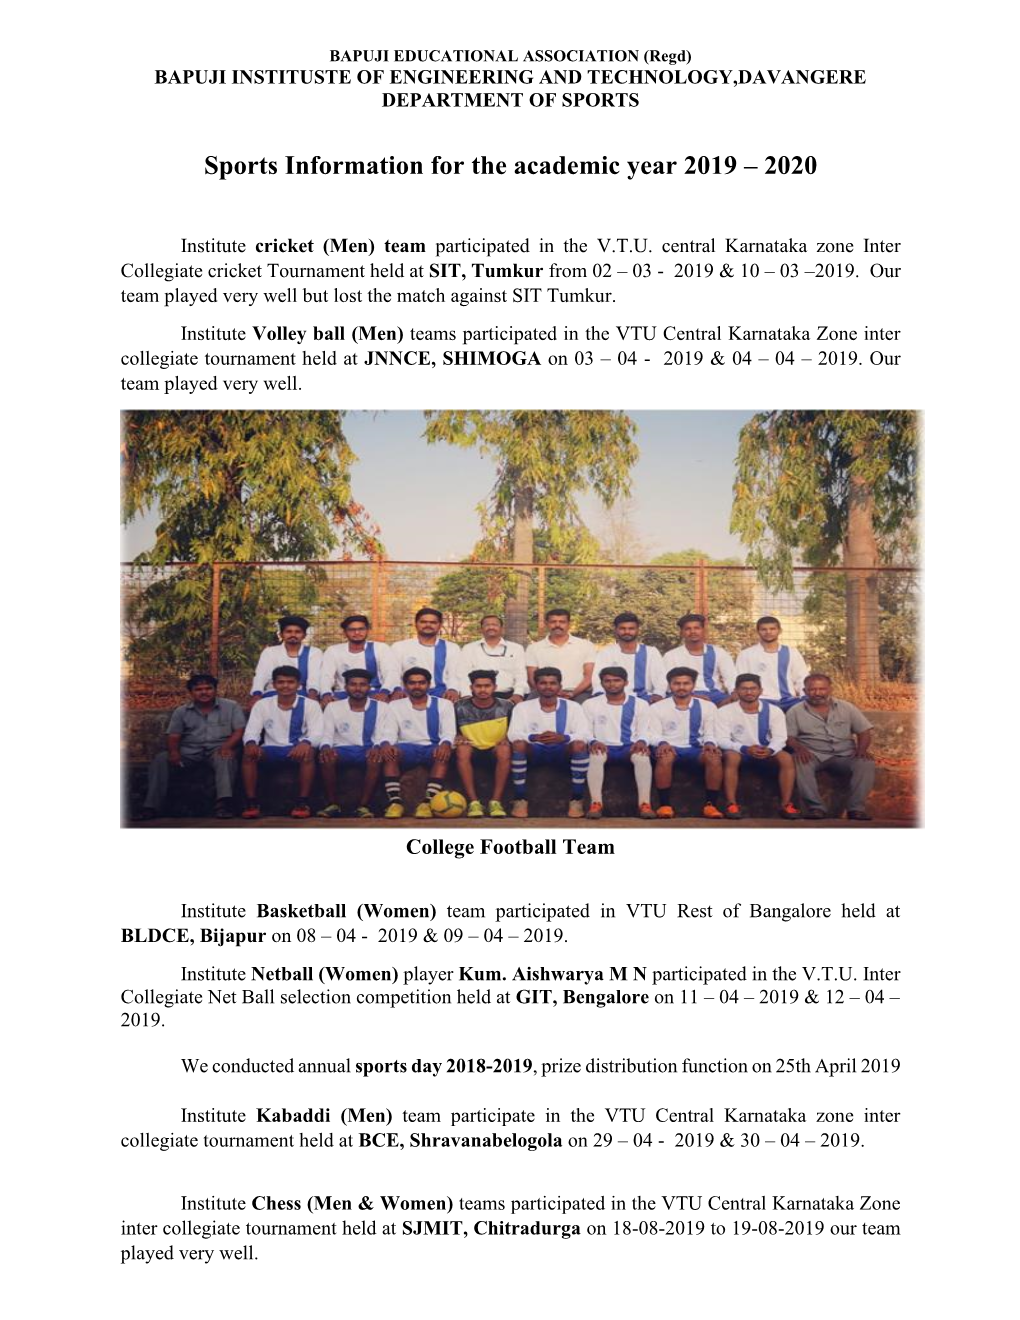 Sports Information for the Academic Year 2019 – 2020